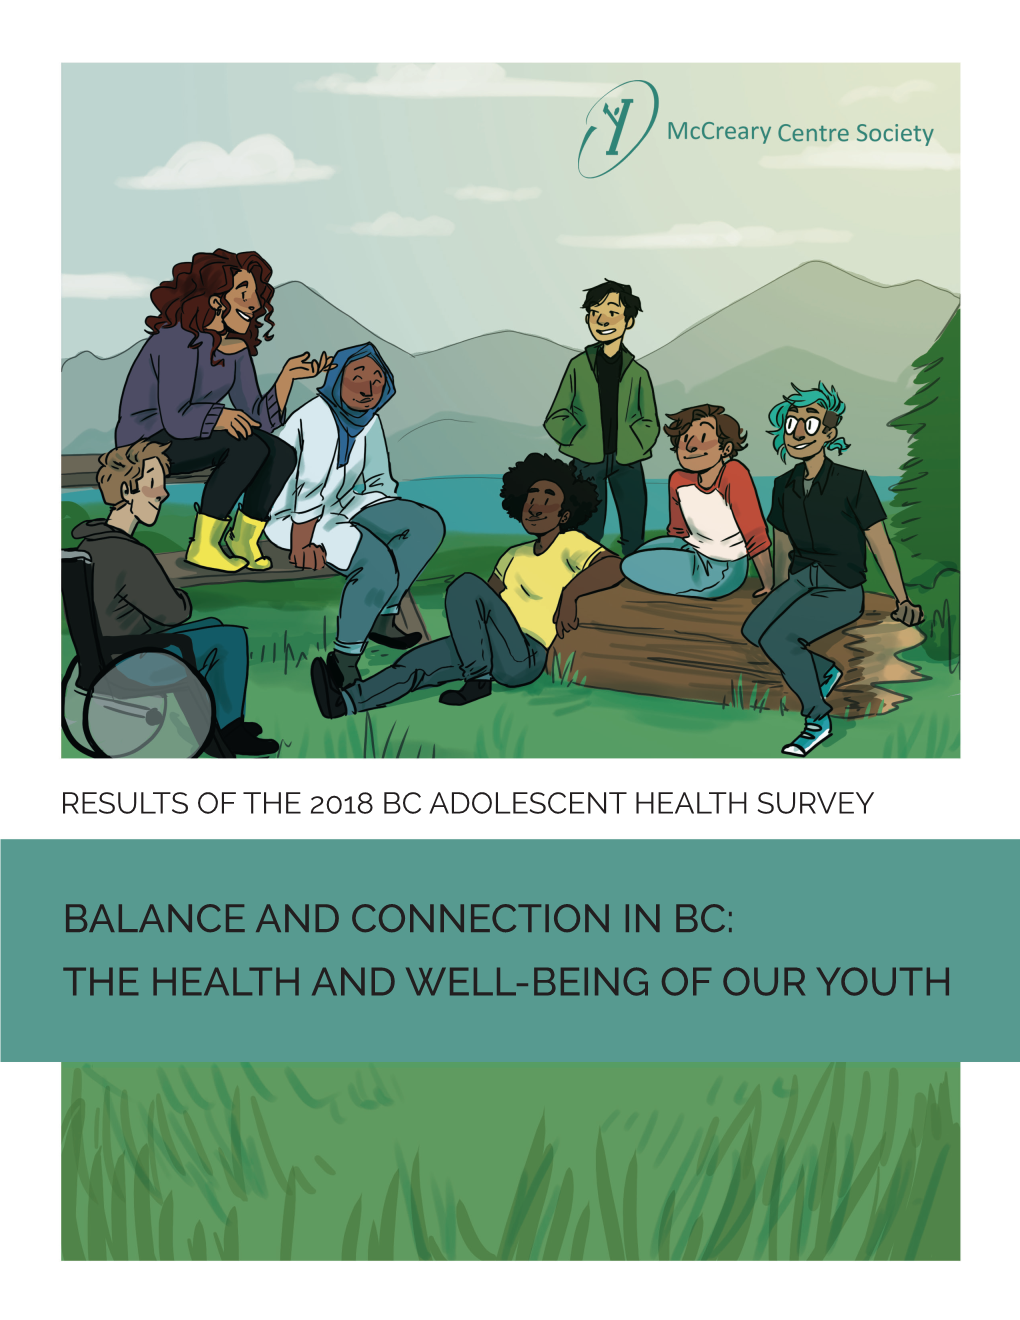 BALANCE and CONNECTION in BC: the HEALTH and WELL-BEING of OUR YOUTH Copyright: Mccreary Centre Society, 2019 Cover Design by Alex Van Der Marel